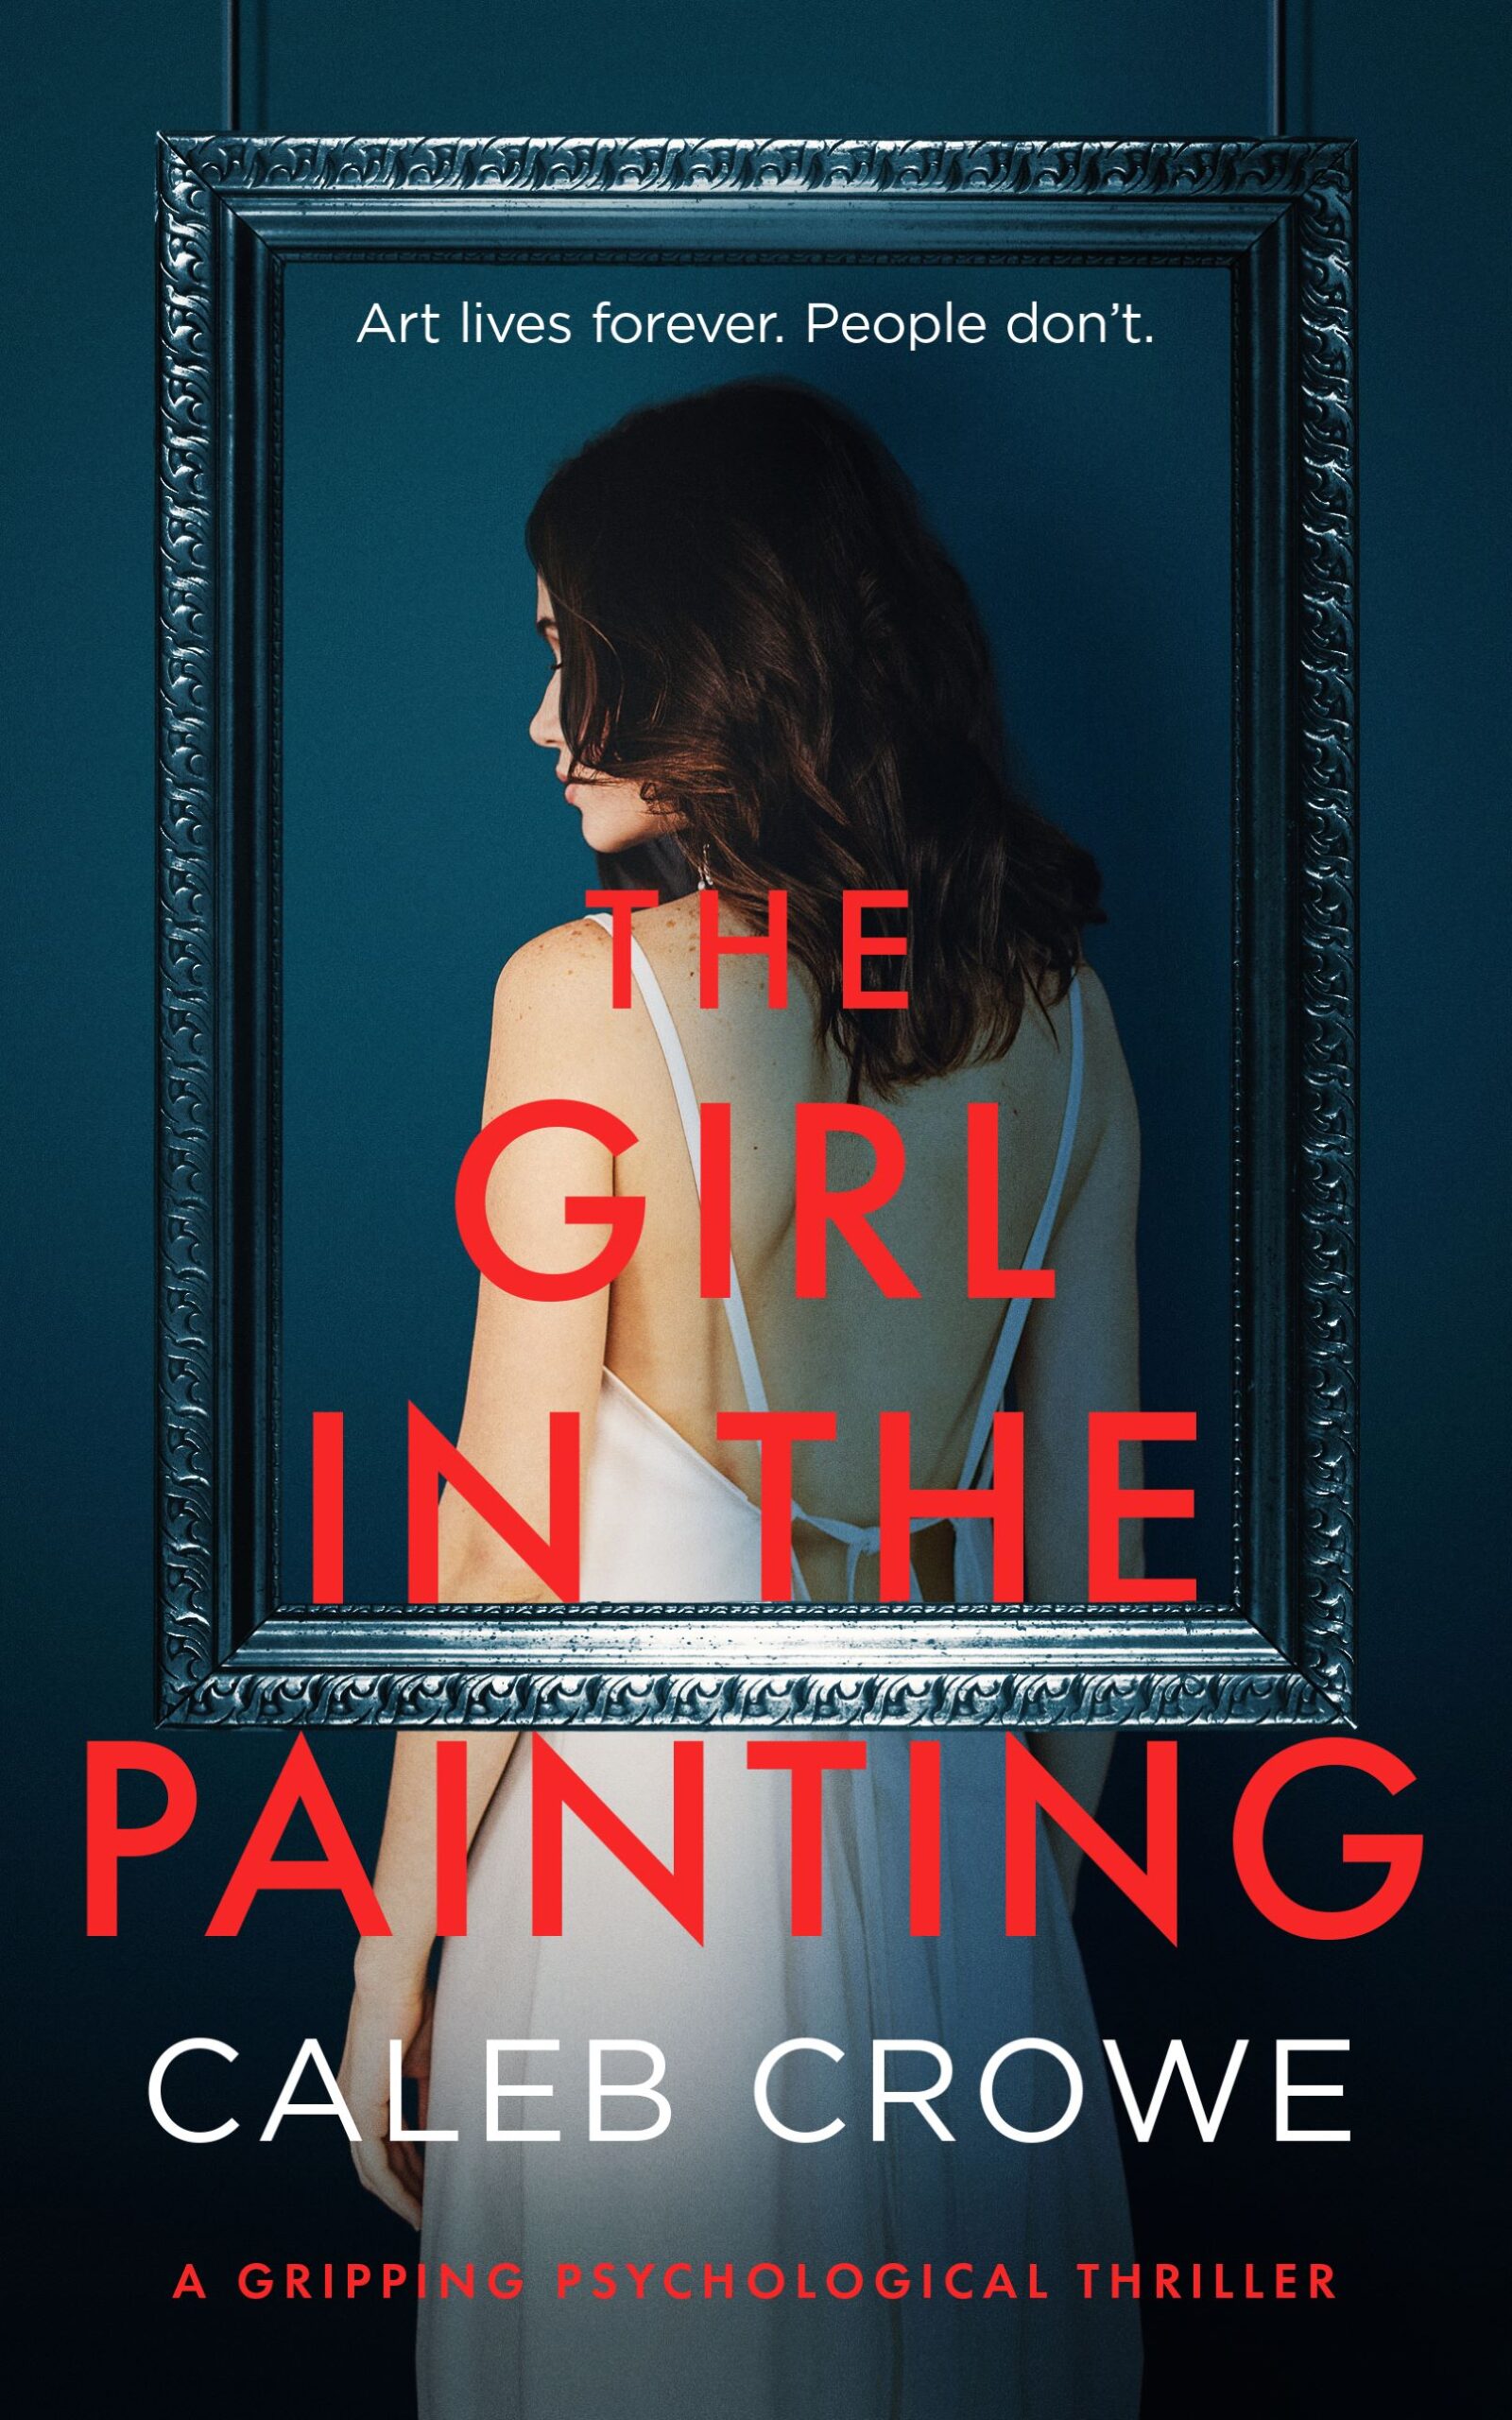 CALEB CROWE’S NEW RELEASE – THE GIRL IN THE PAINTING